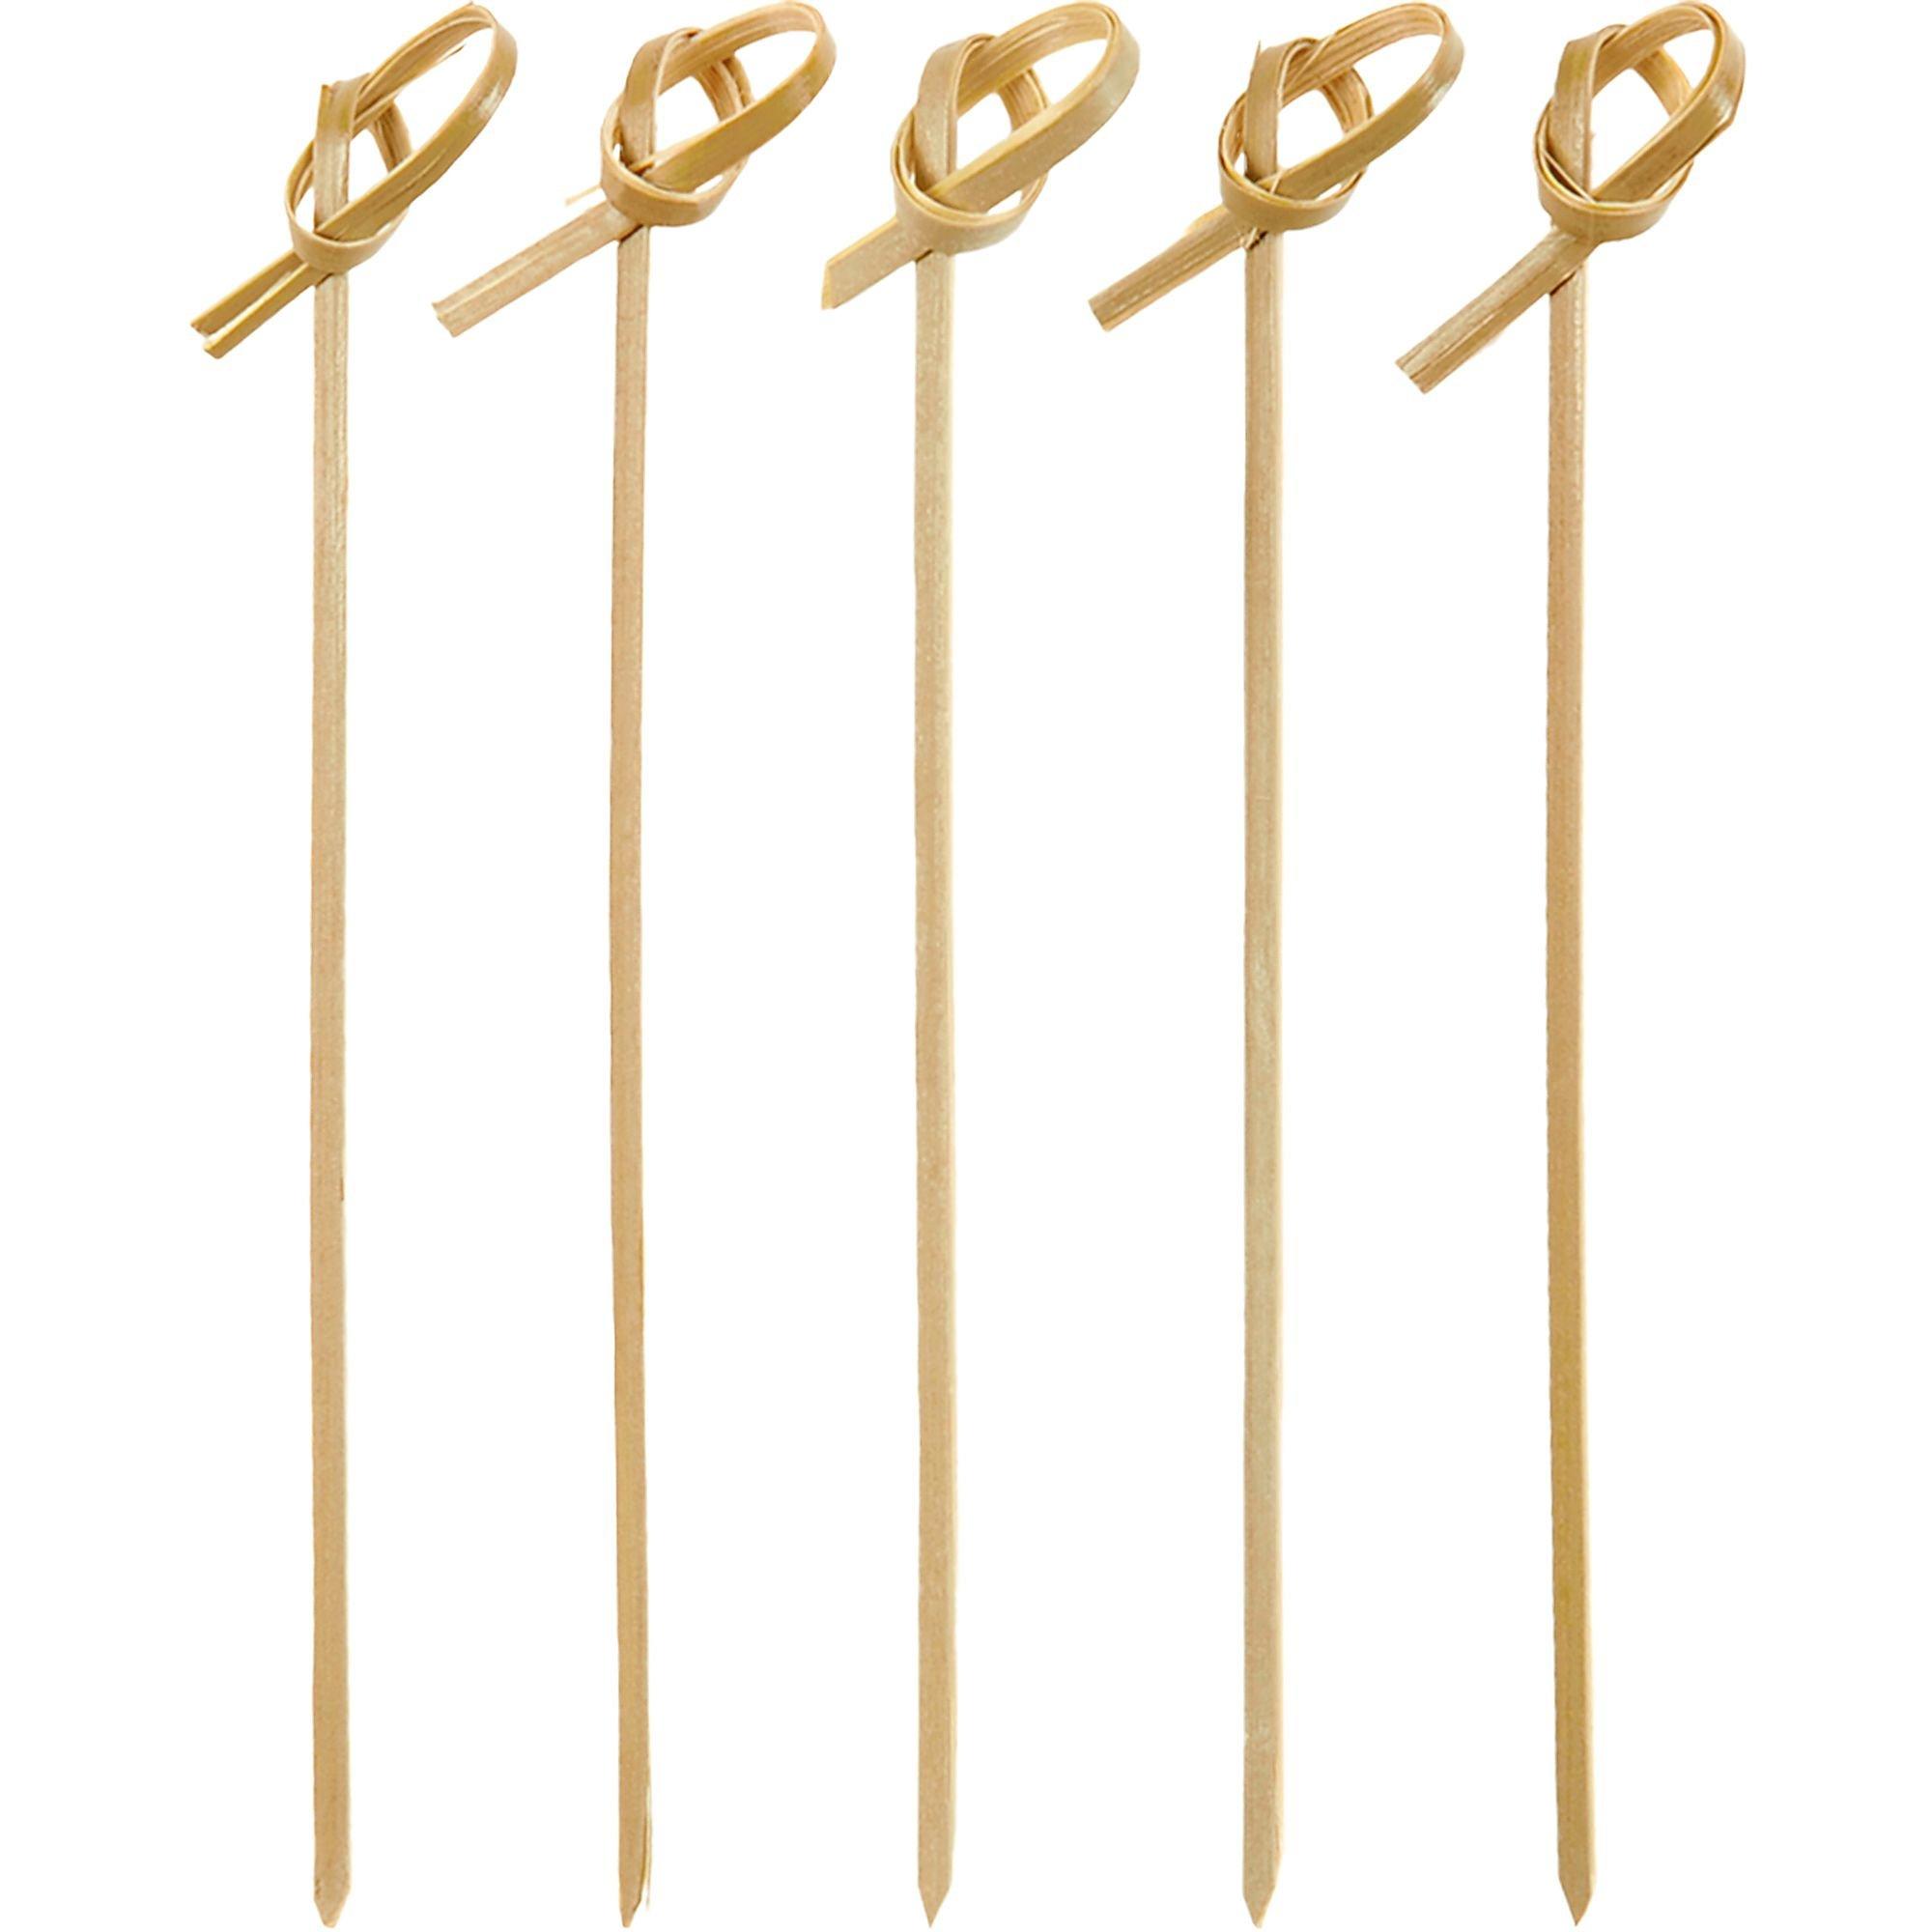 Tall Bamboo Knot Party Picks 50ct | Party City